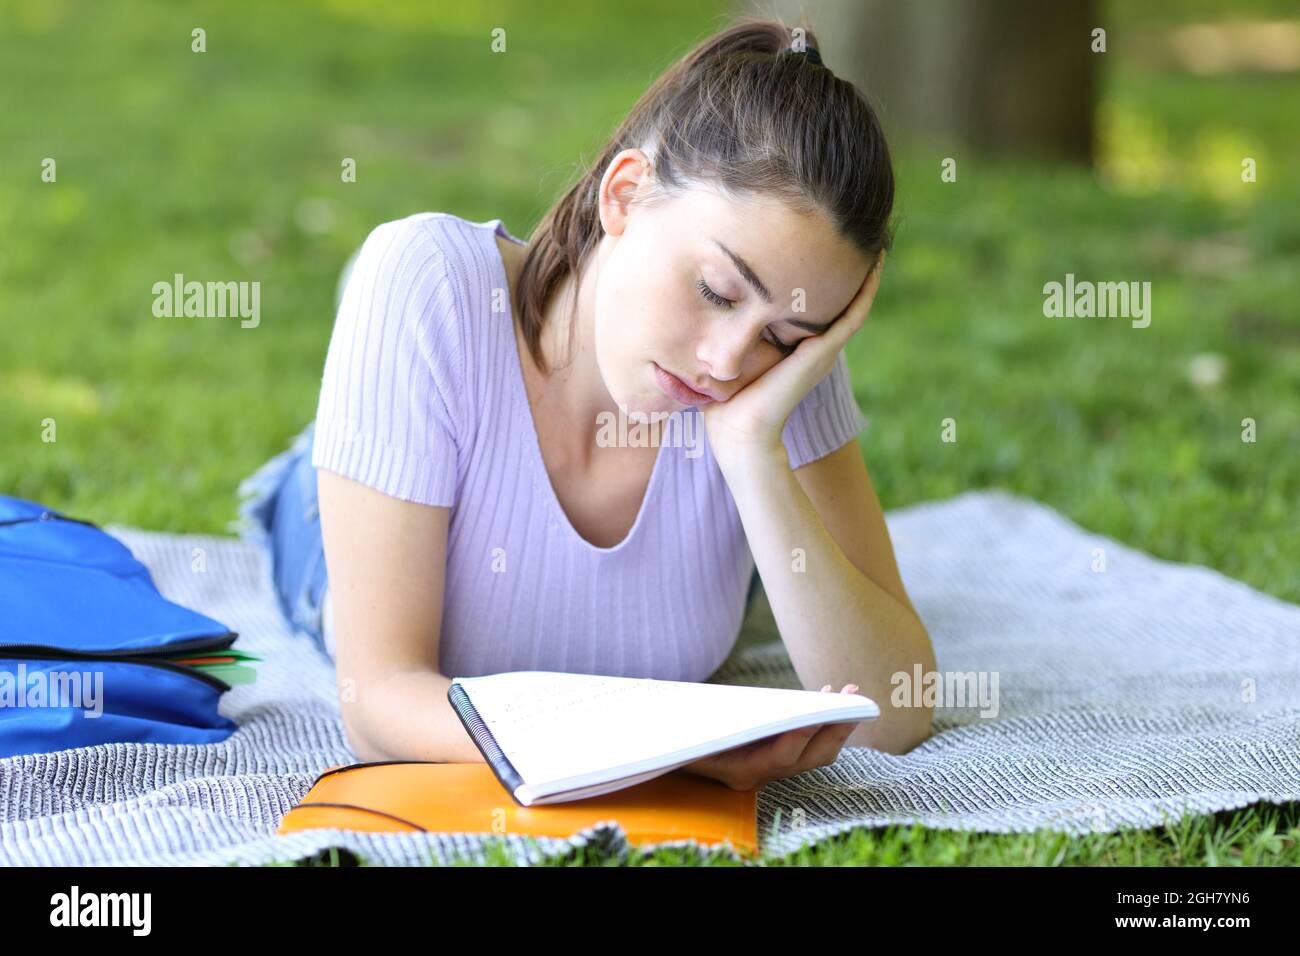 Asleep student trying to memorize notes lying on the grass in a park or campus Stock Photo